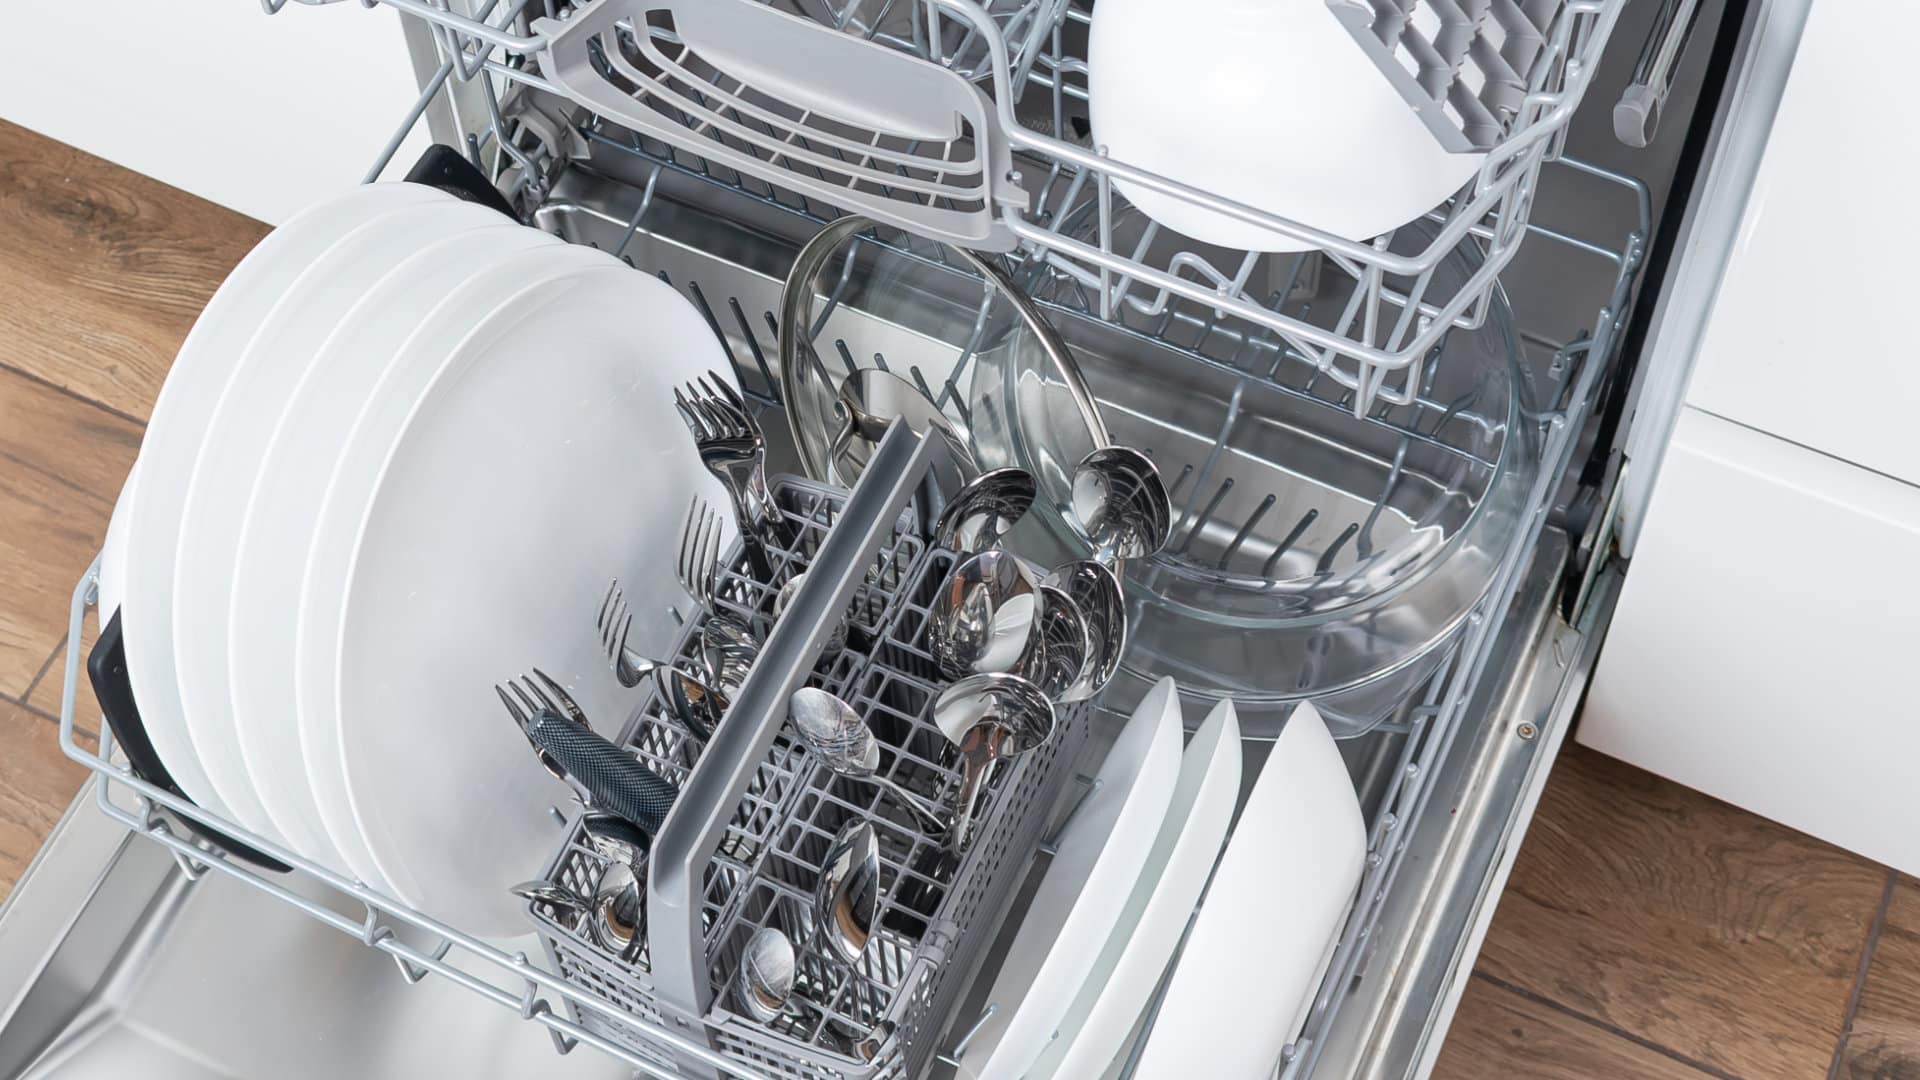 Featured image for “How to Clean a Smelly Dishwasher Properly”